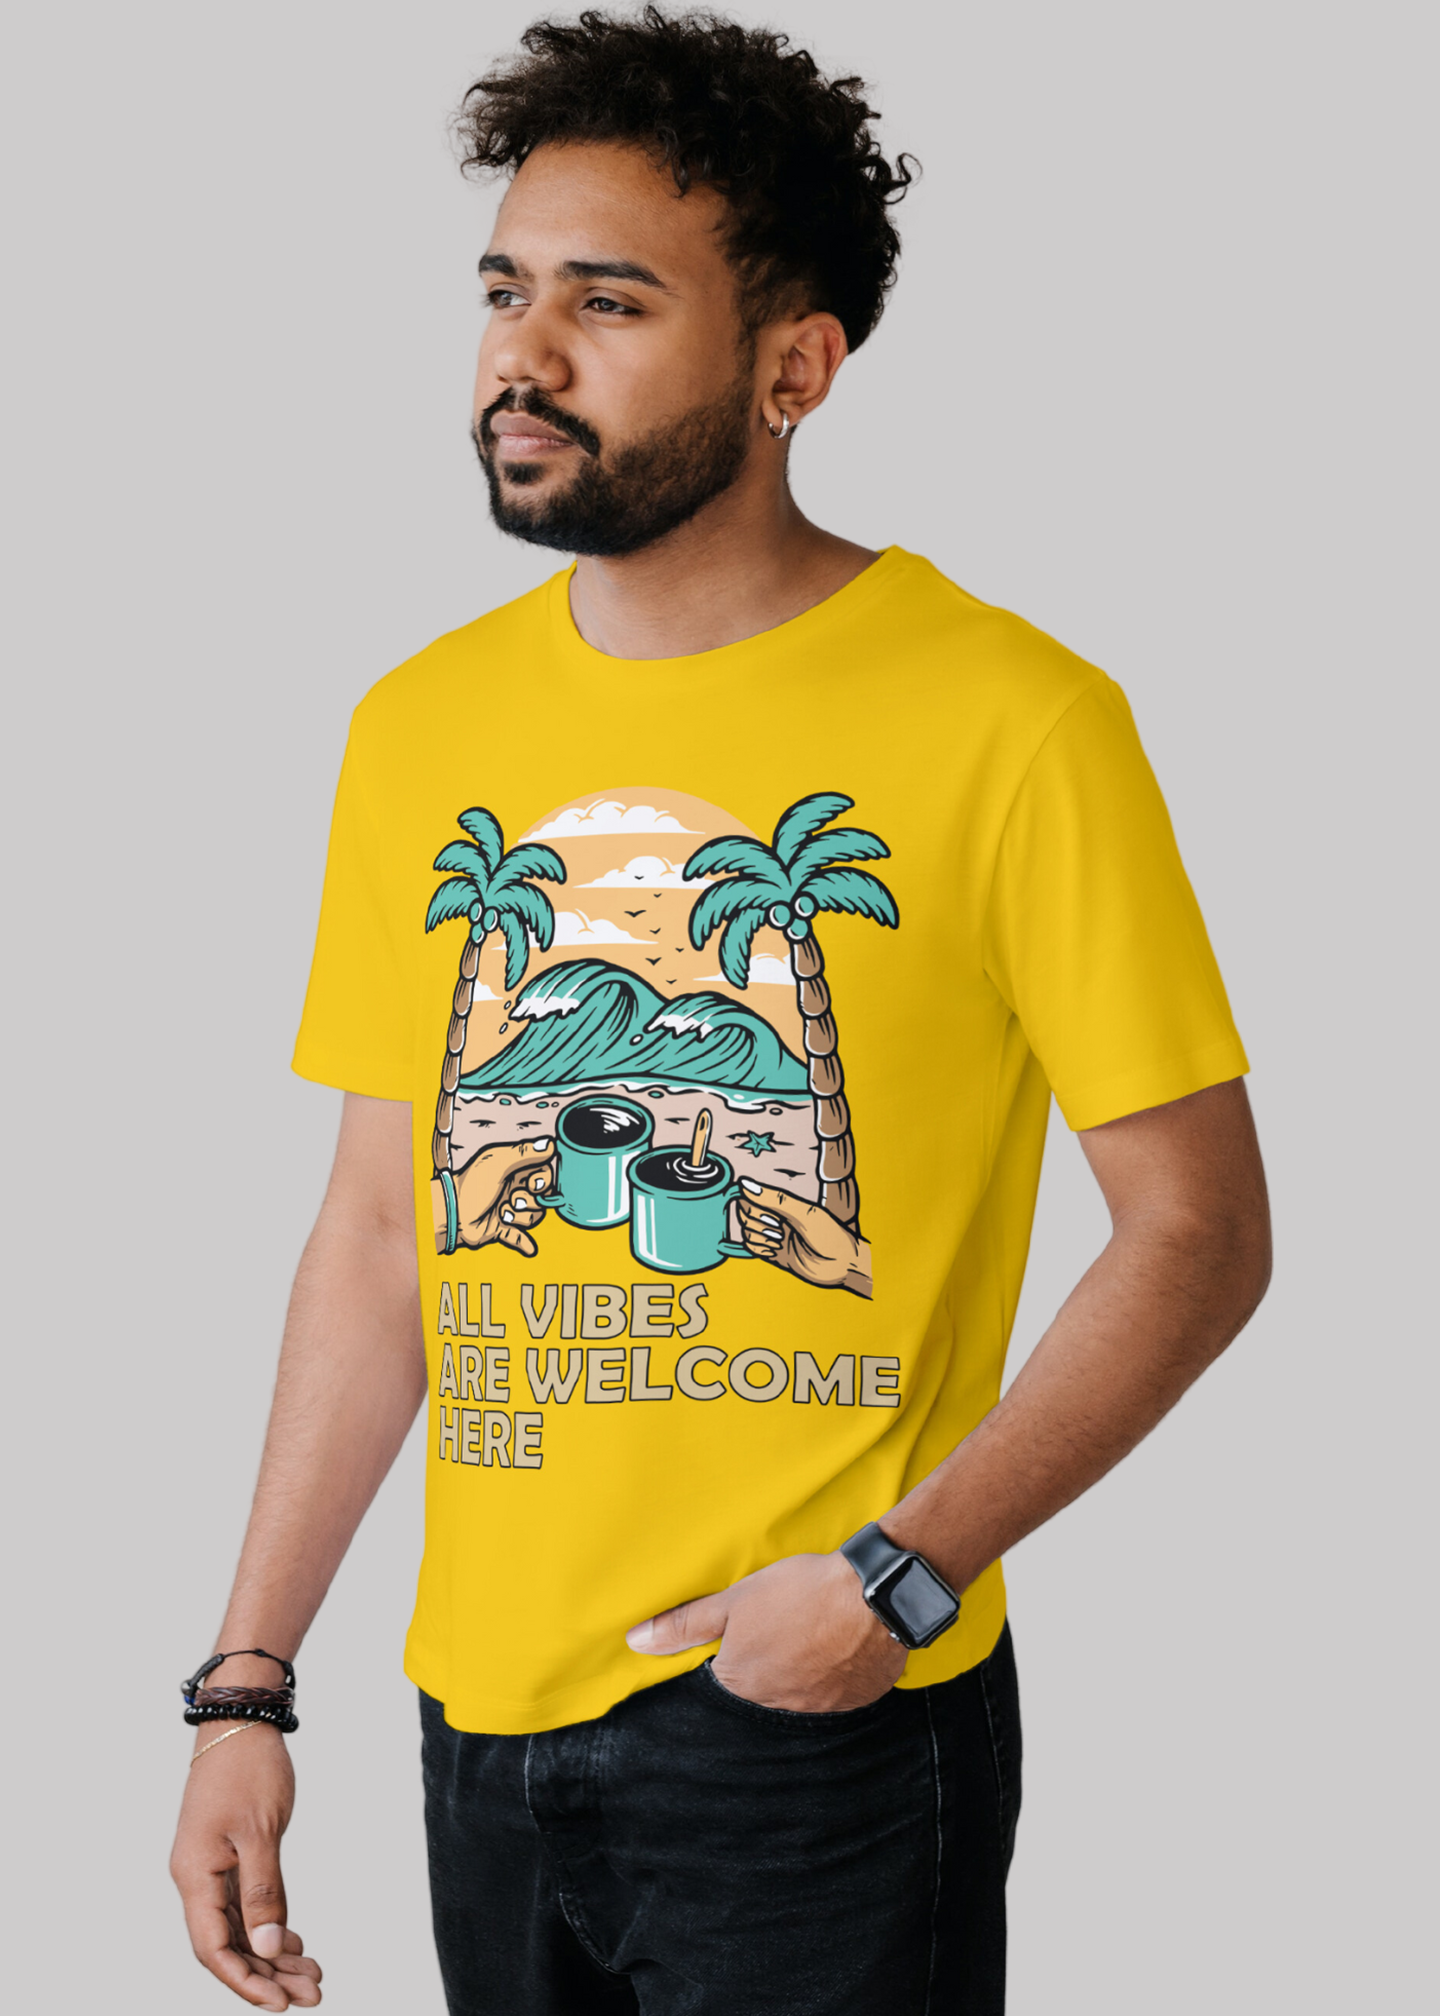 All vibes are welcome here Printed Half Sleeve Premium Cotton T-shirt For Men